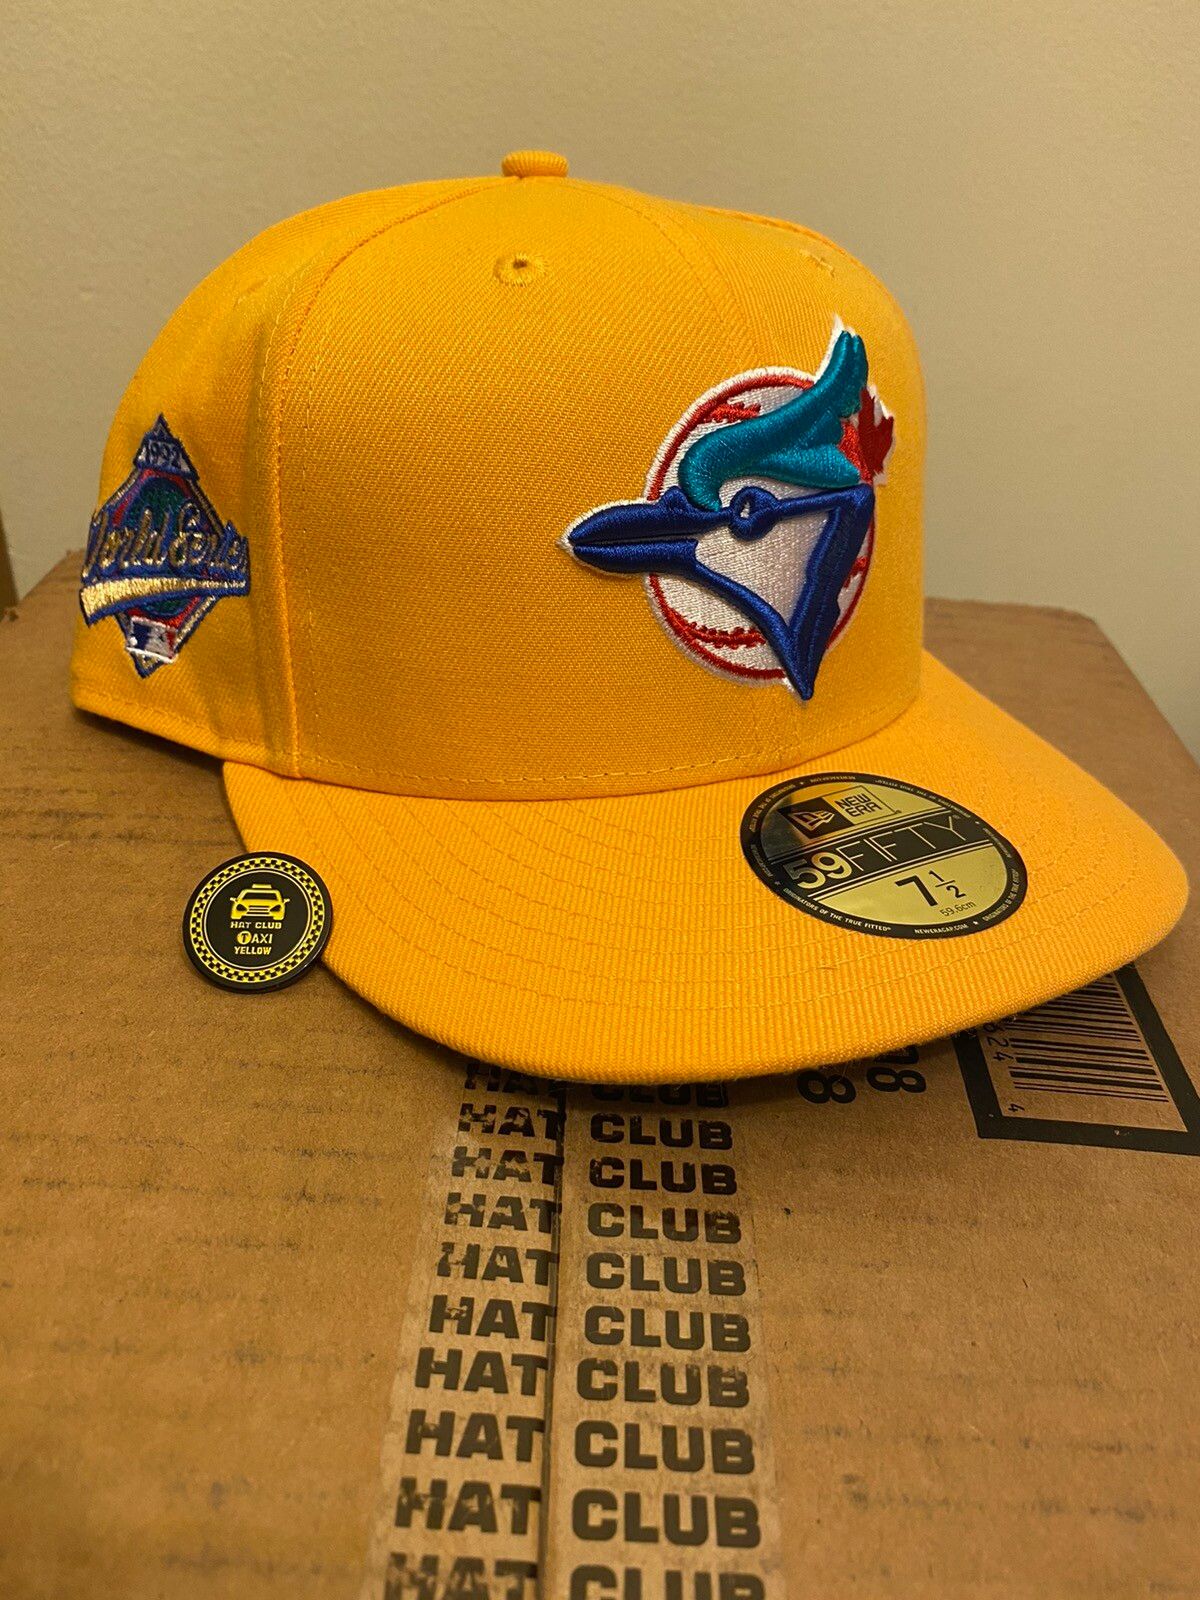 This Blue Jays cap by @baldysmaldy in collaboration with Hat Club